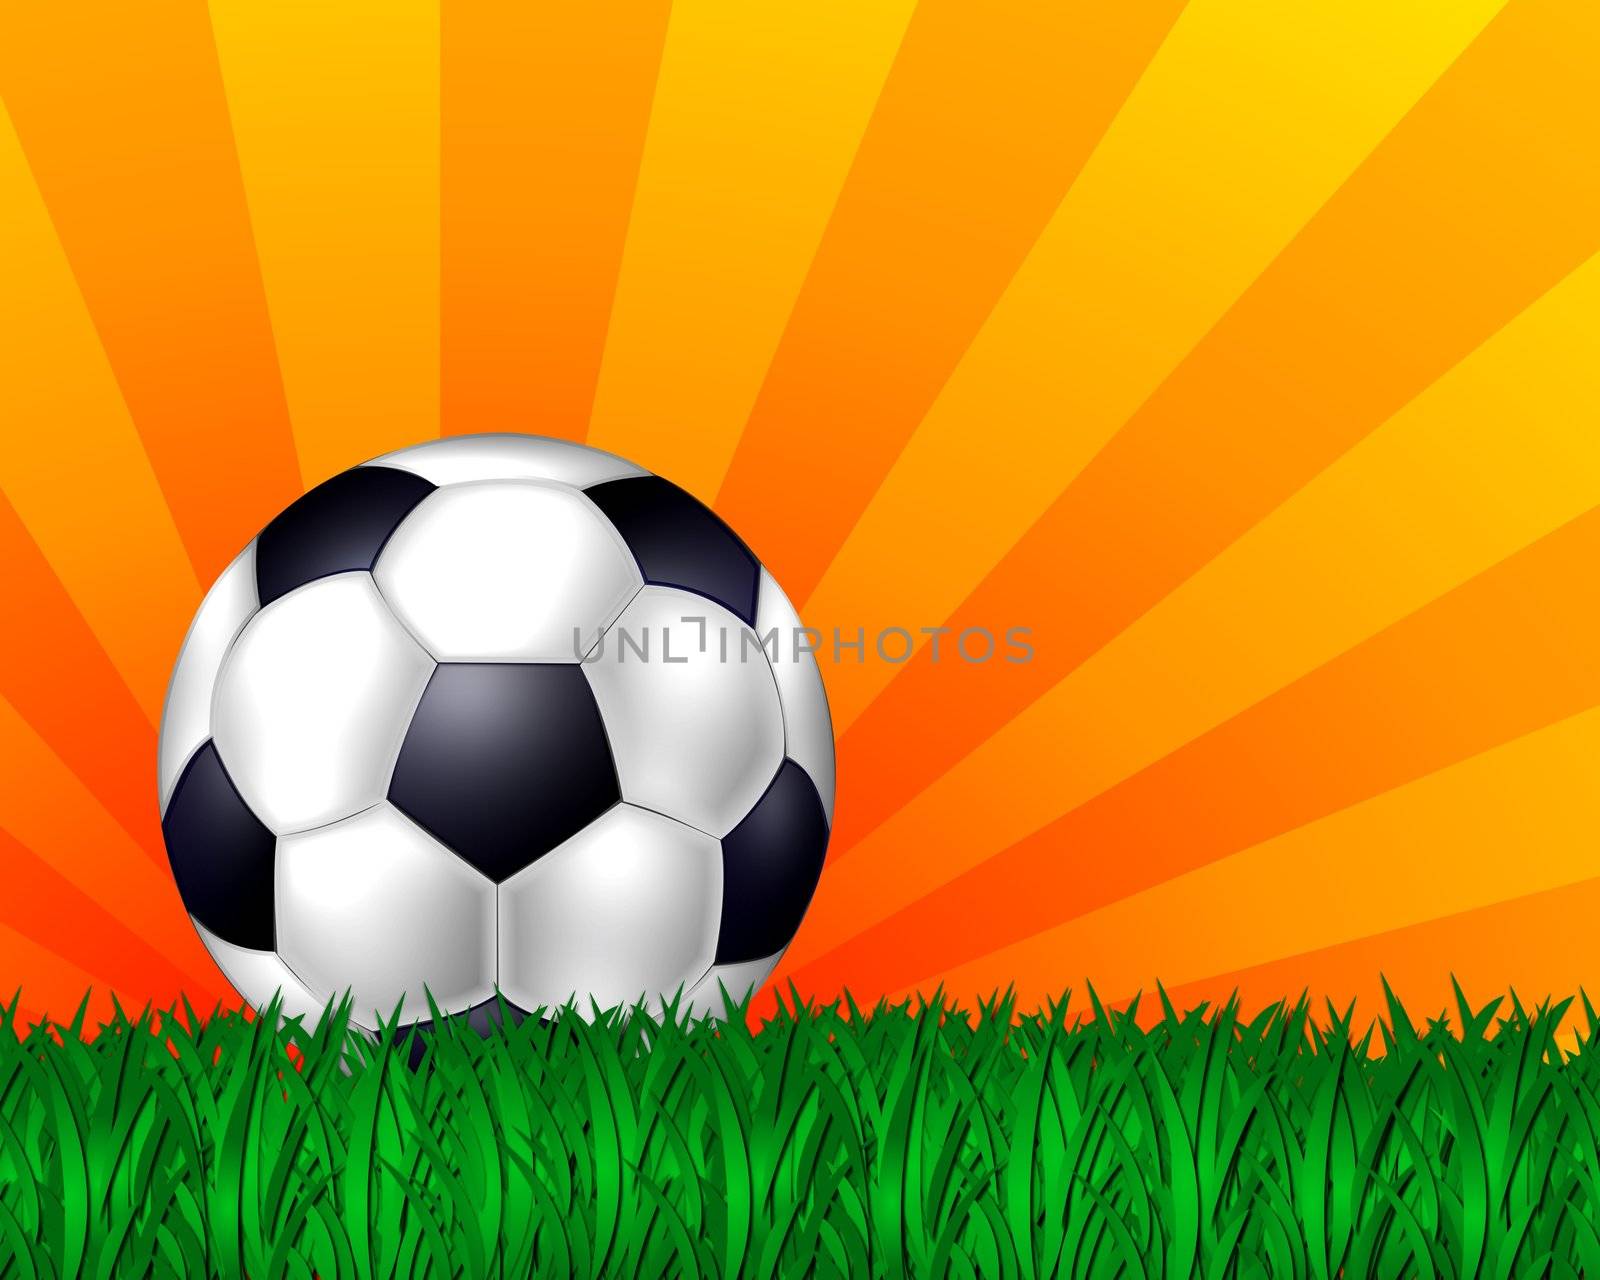 colorful illustration of a soccer ball